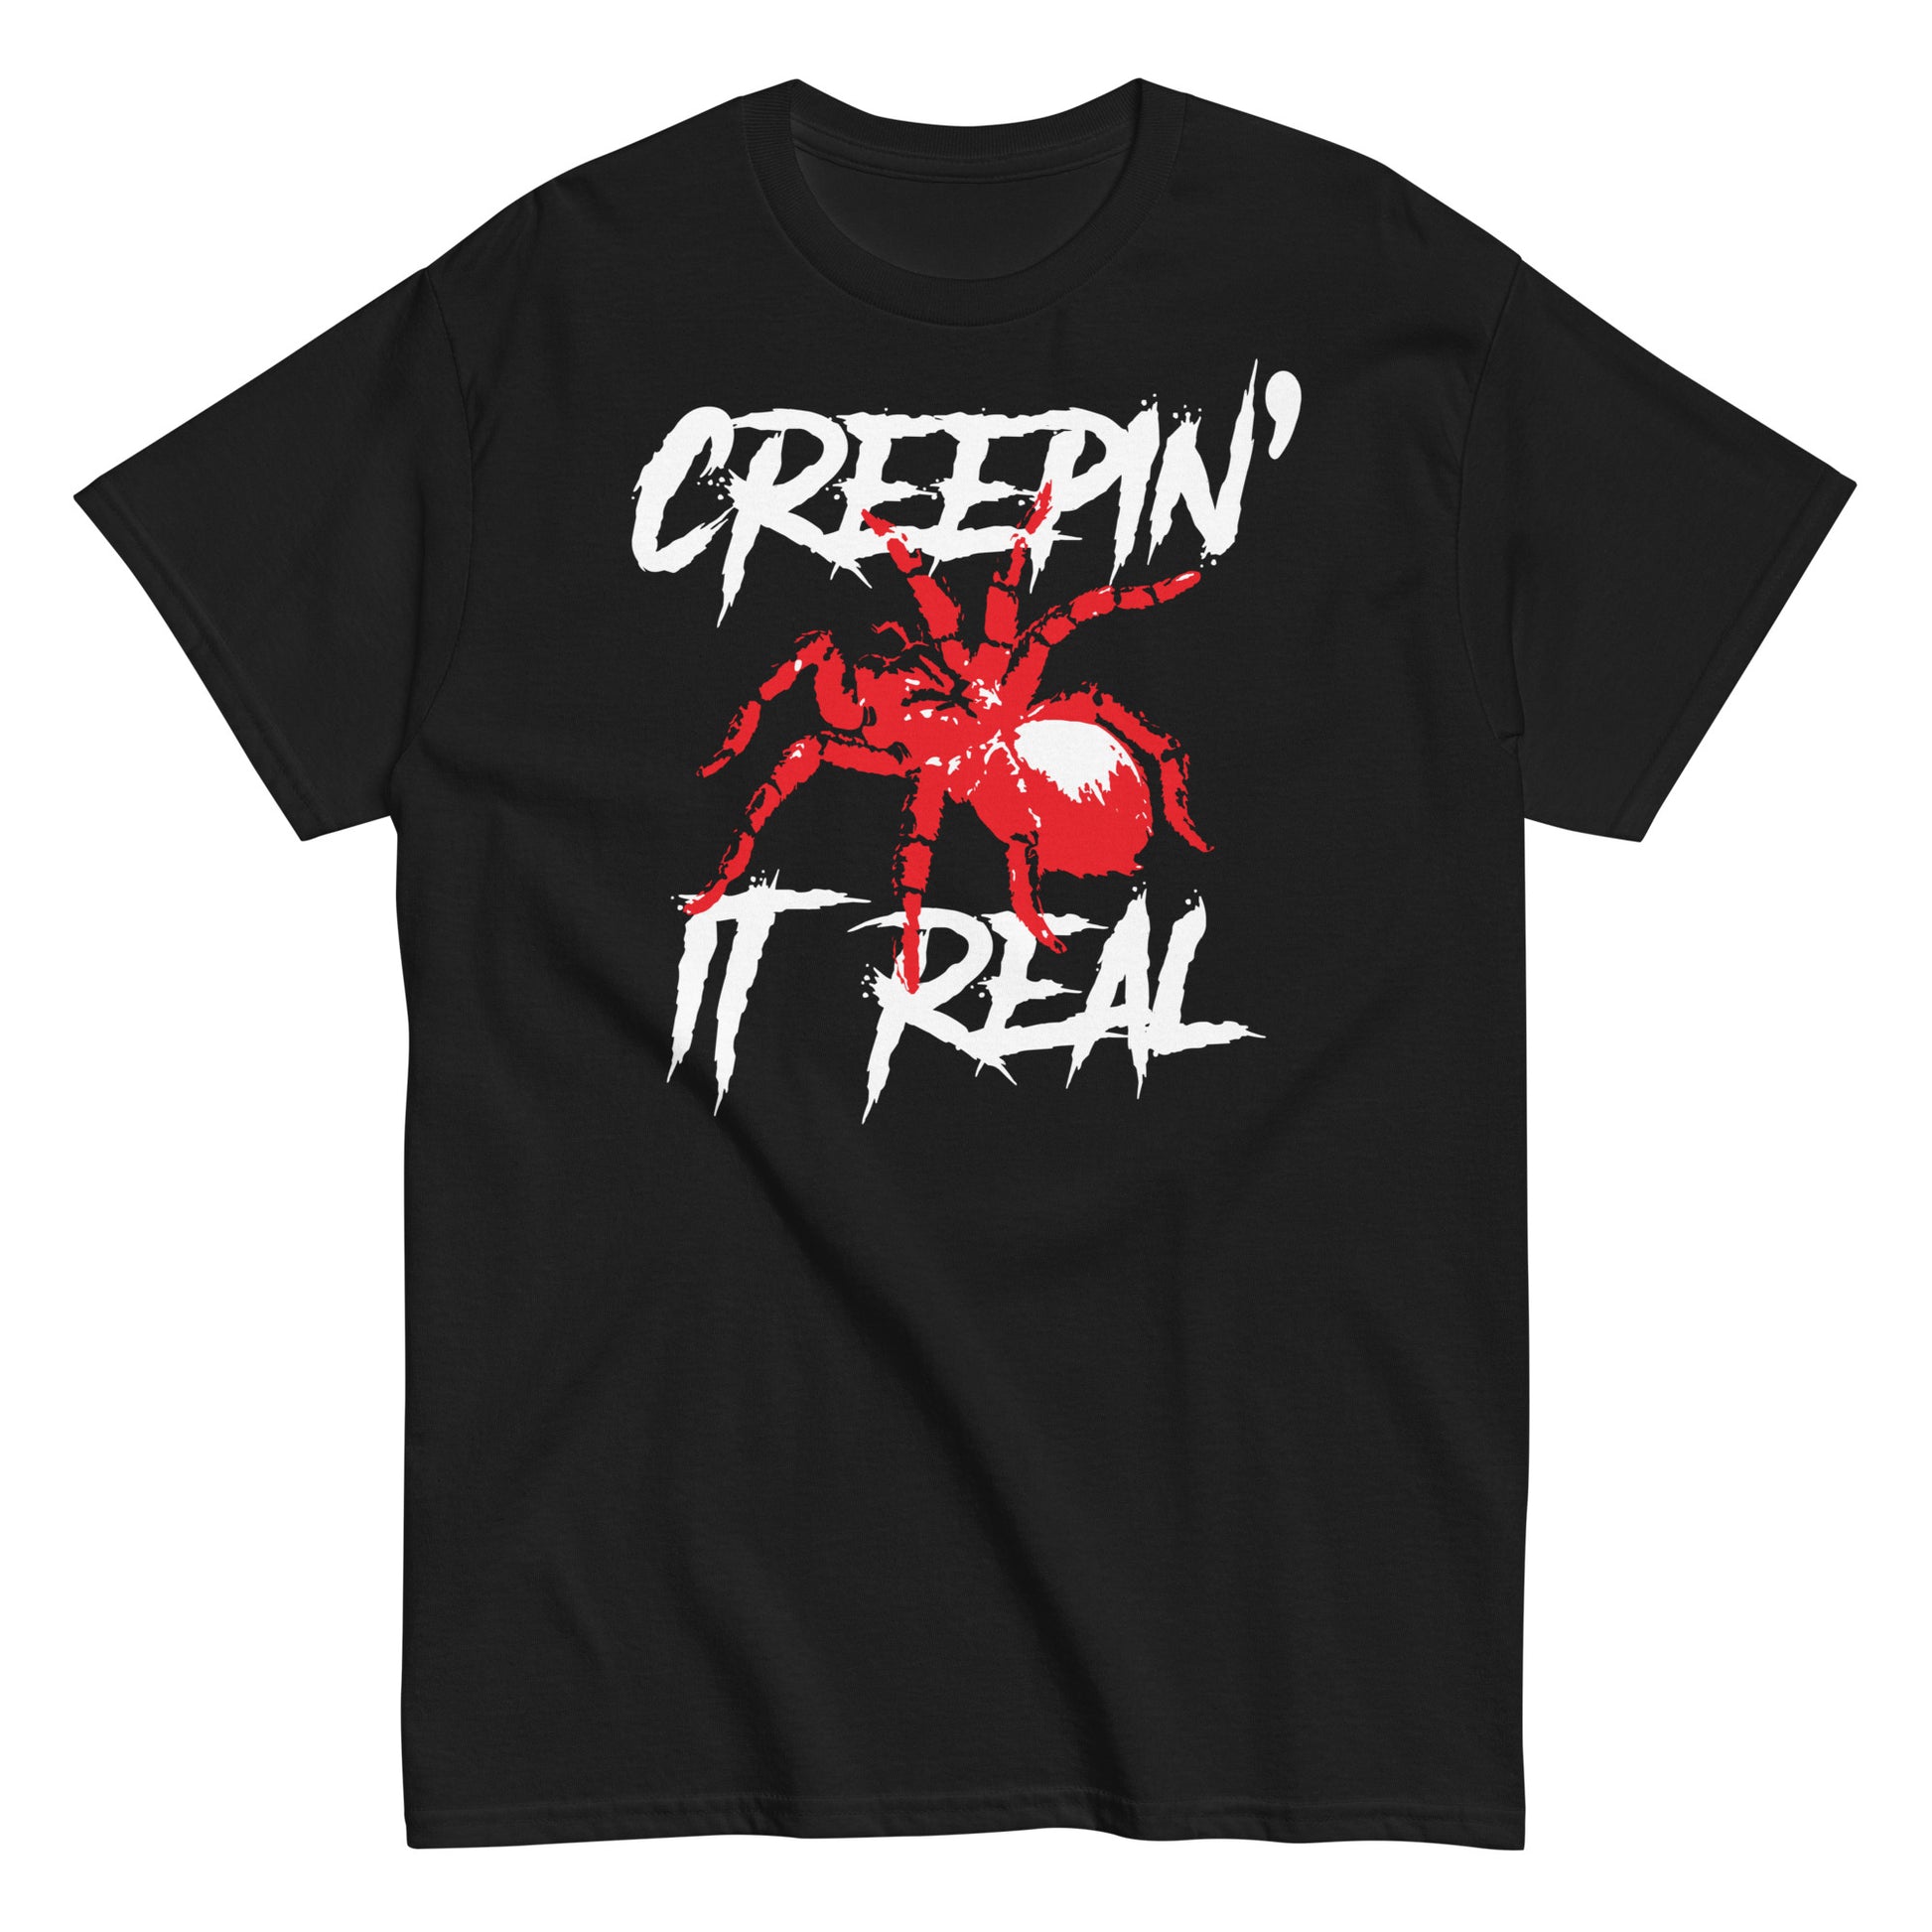 Creepin' It Real' Chic Tee - Soft Style